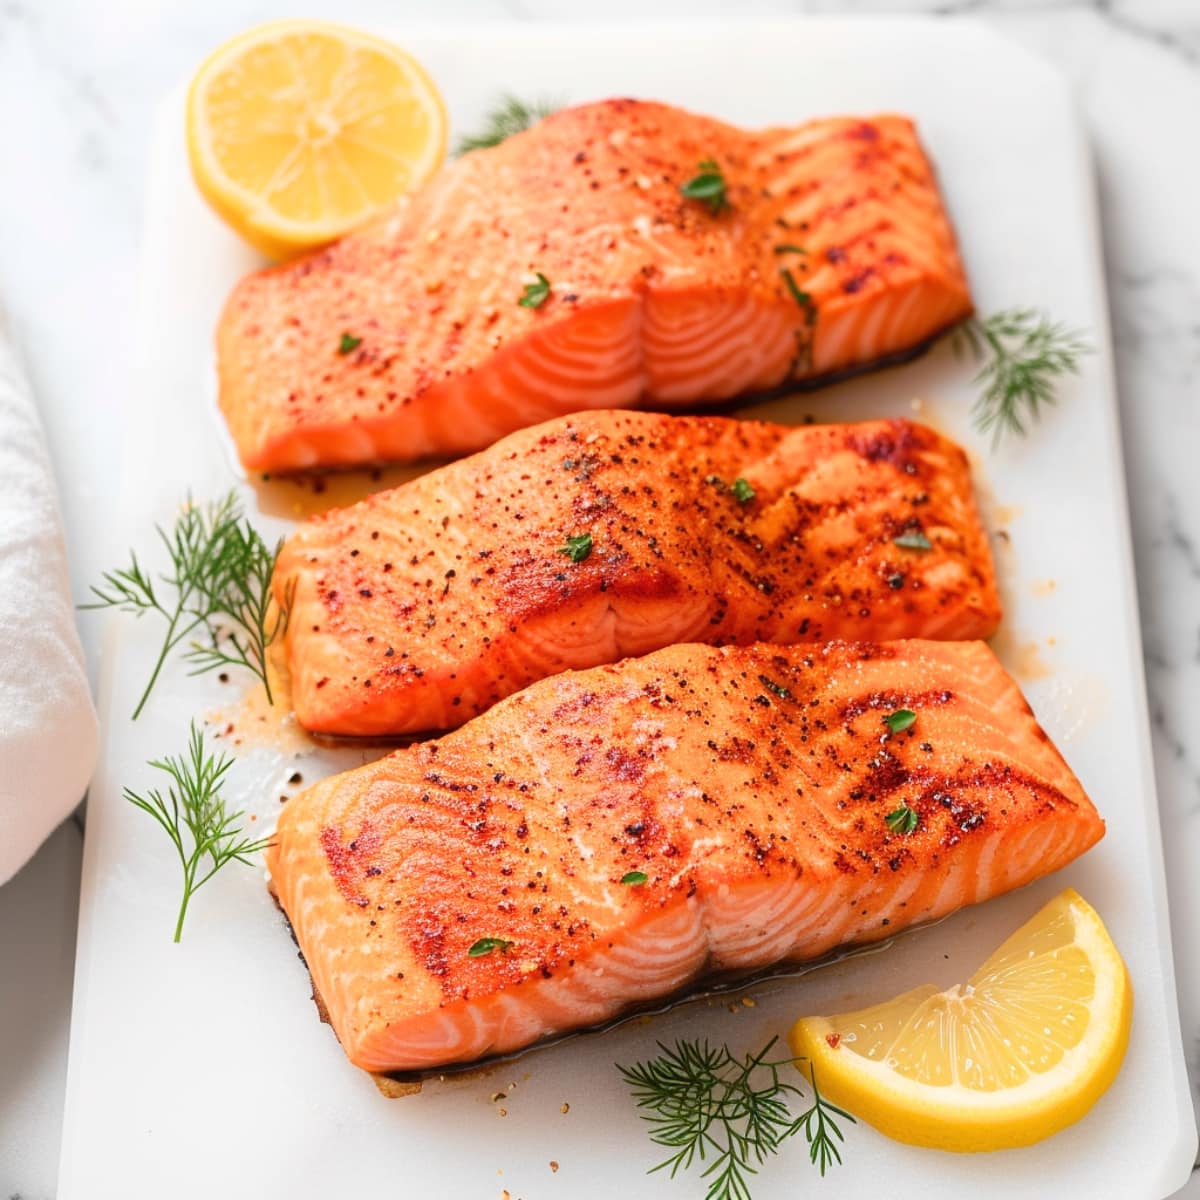 Marinated salmon fillet with lemon slices